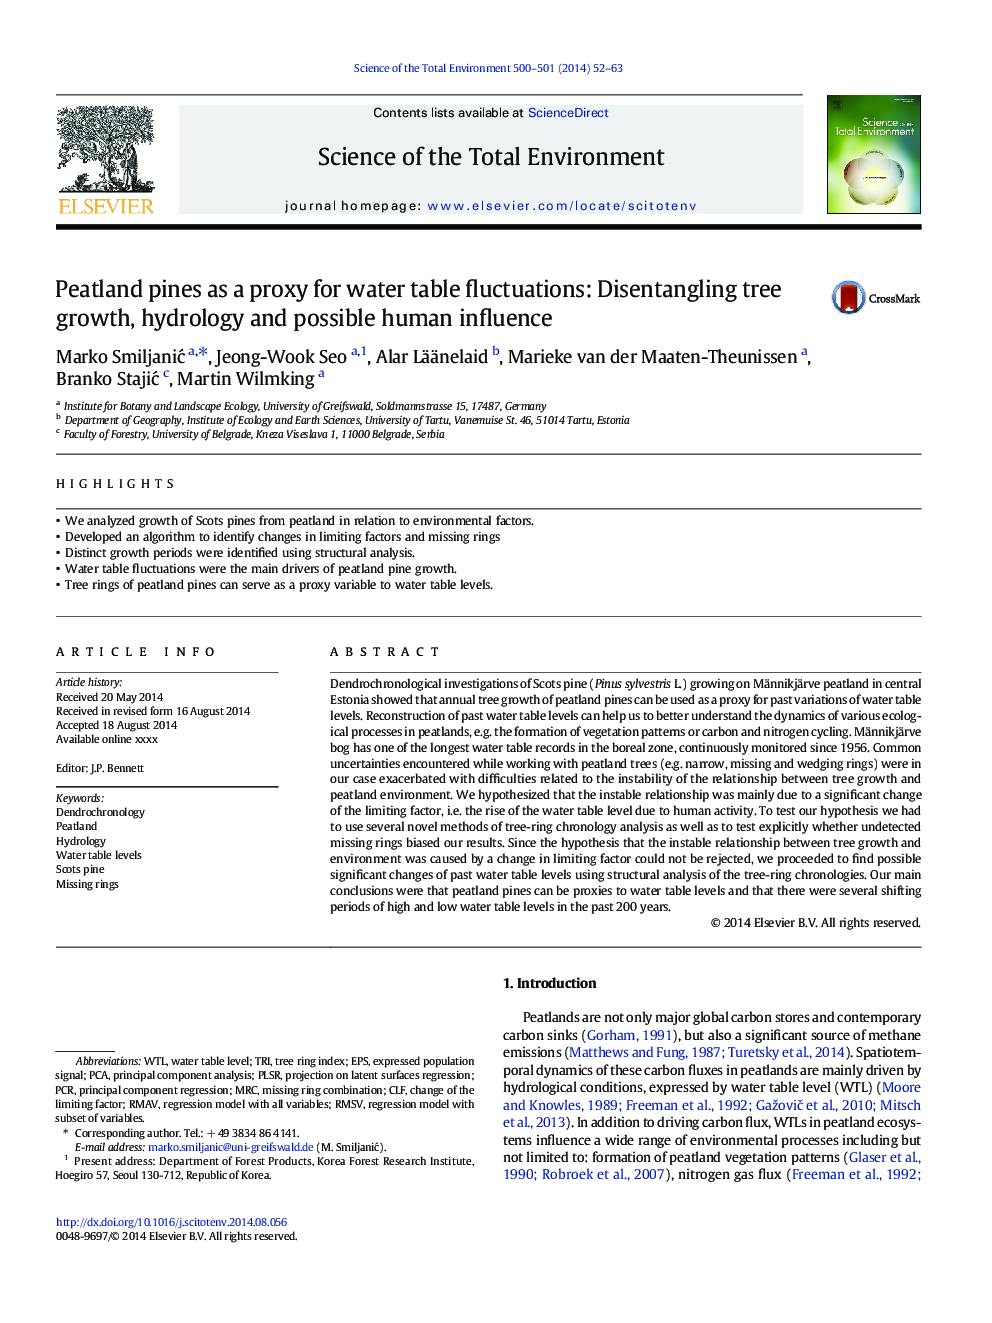 Peatland pines as a proxy for water table fluctuations: Disentangling tree growth, hydrology and possible human influence